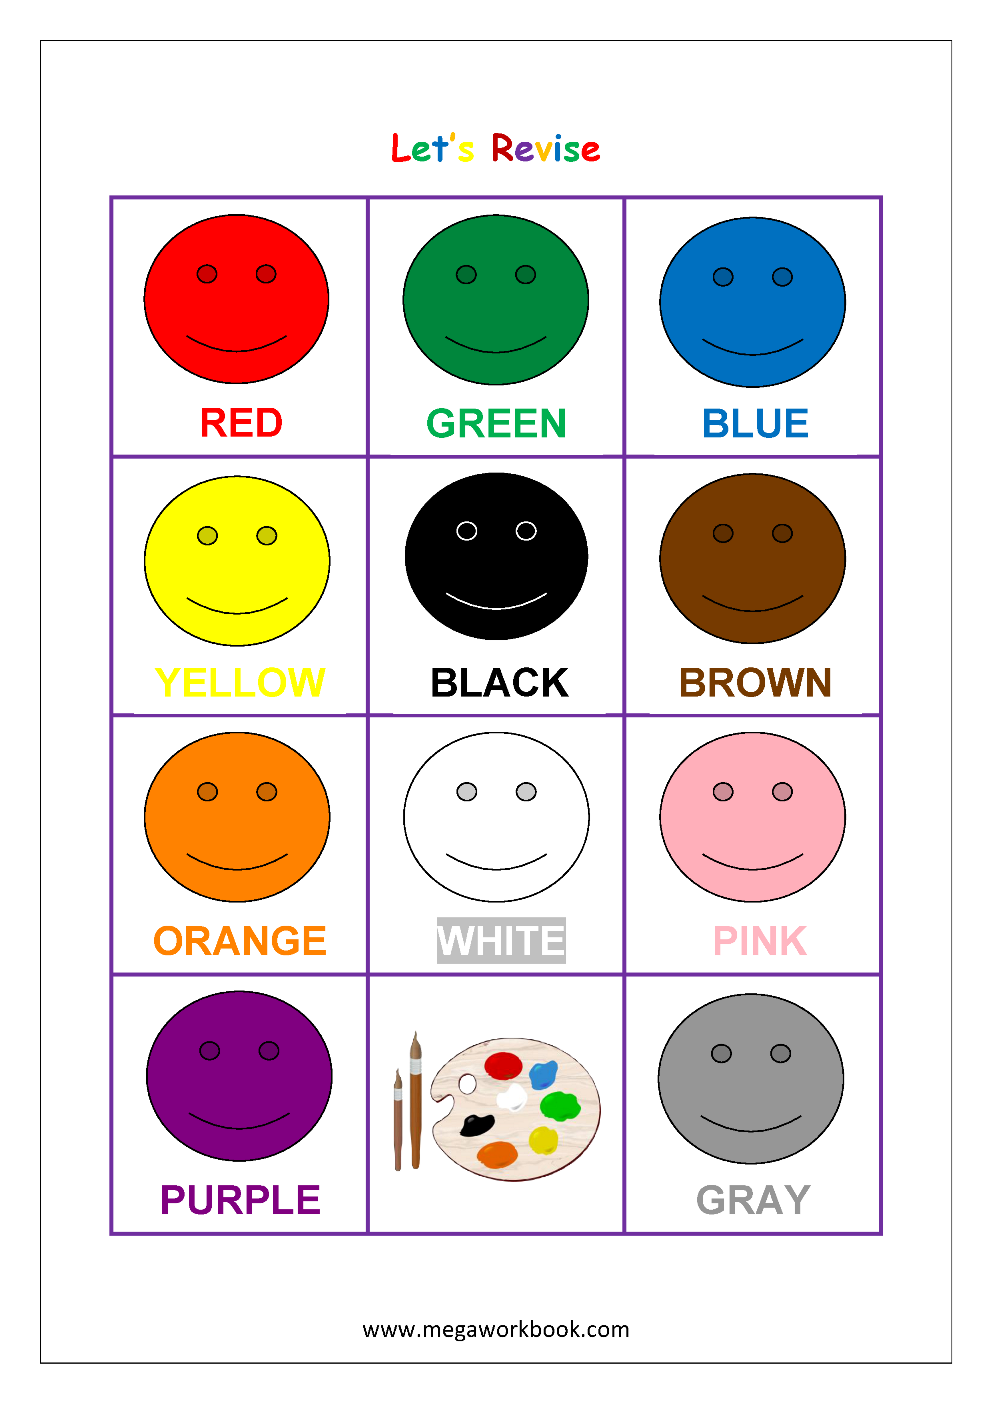 learn-colors-learn-colors-for-kids-learning-colors-for-toddlers